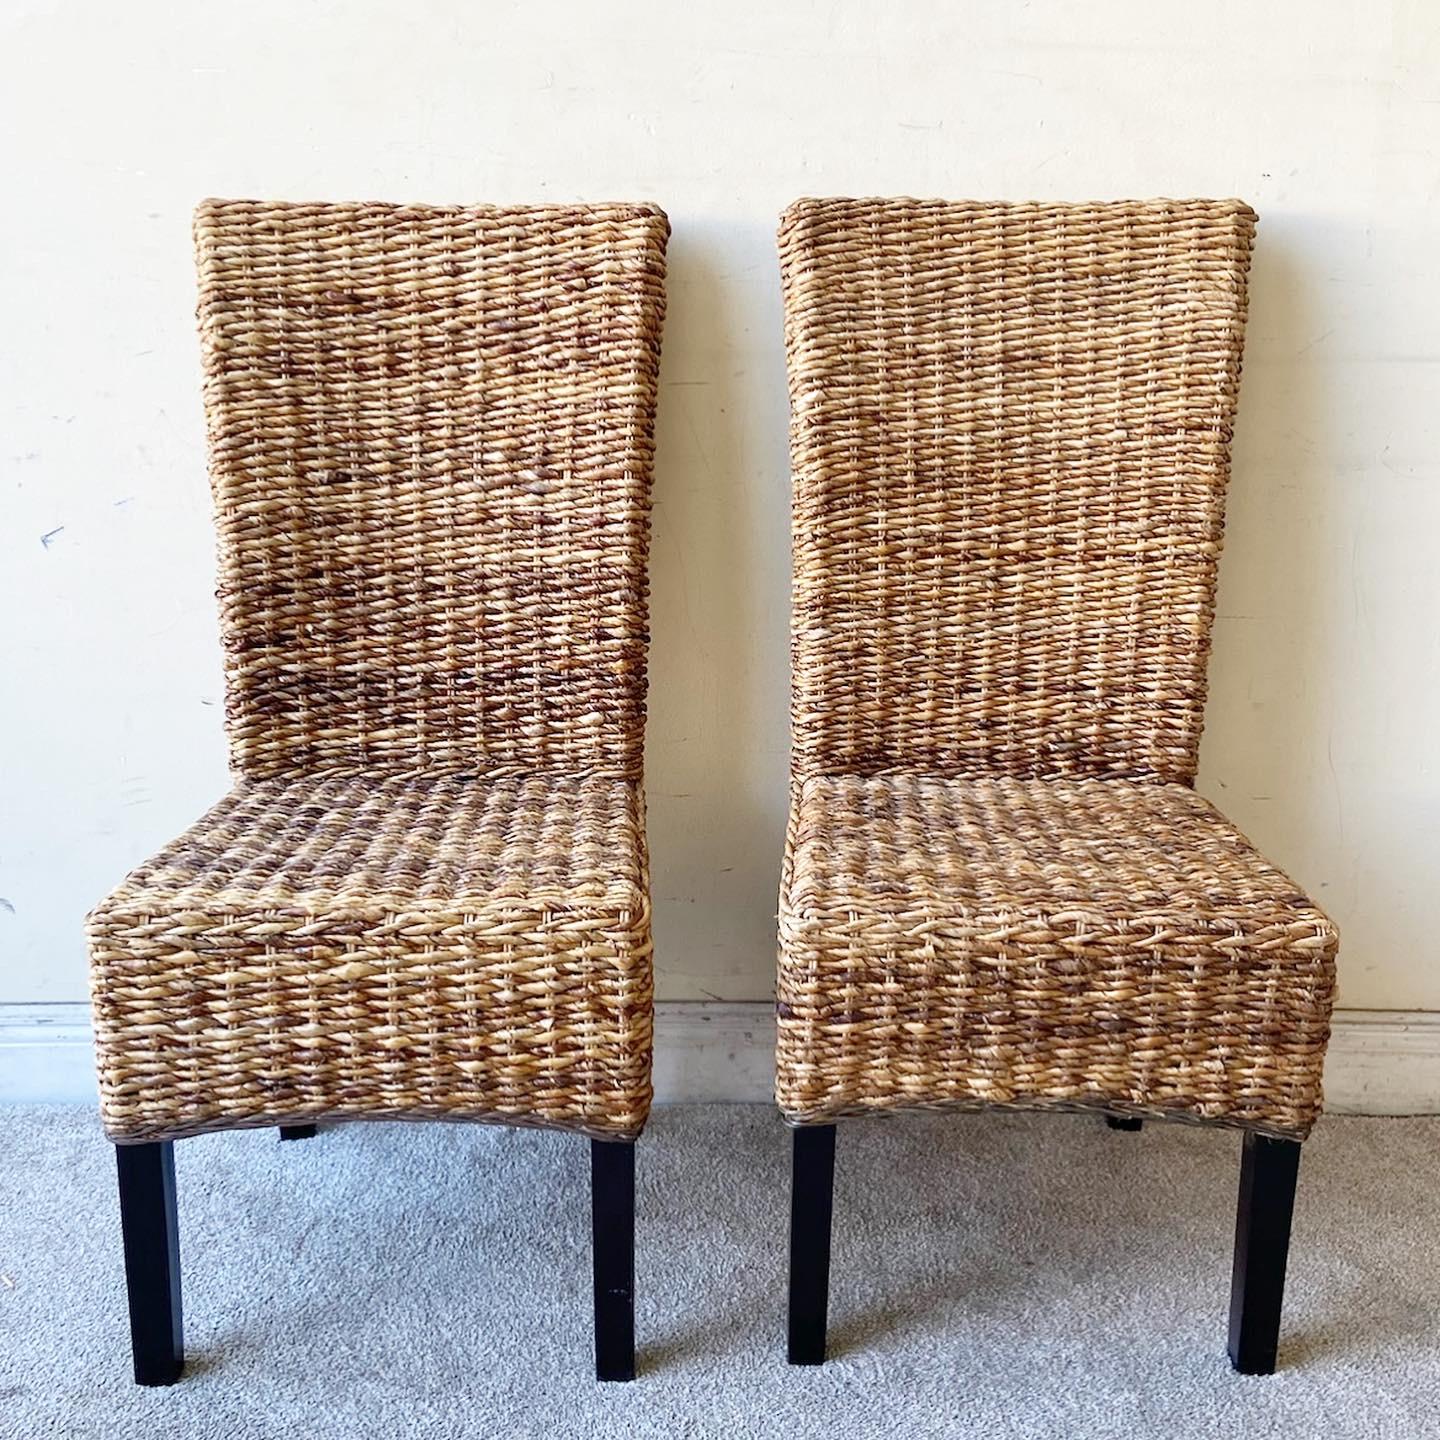 Incredible set of 4 boho chic dining chairs. Each feature a woven sea grass backrest, seat and skirt over wooden legs.